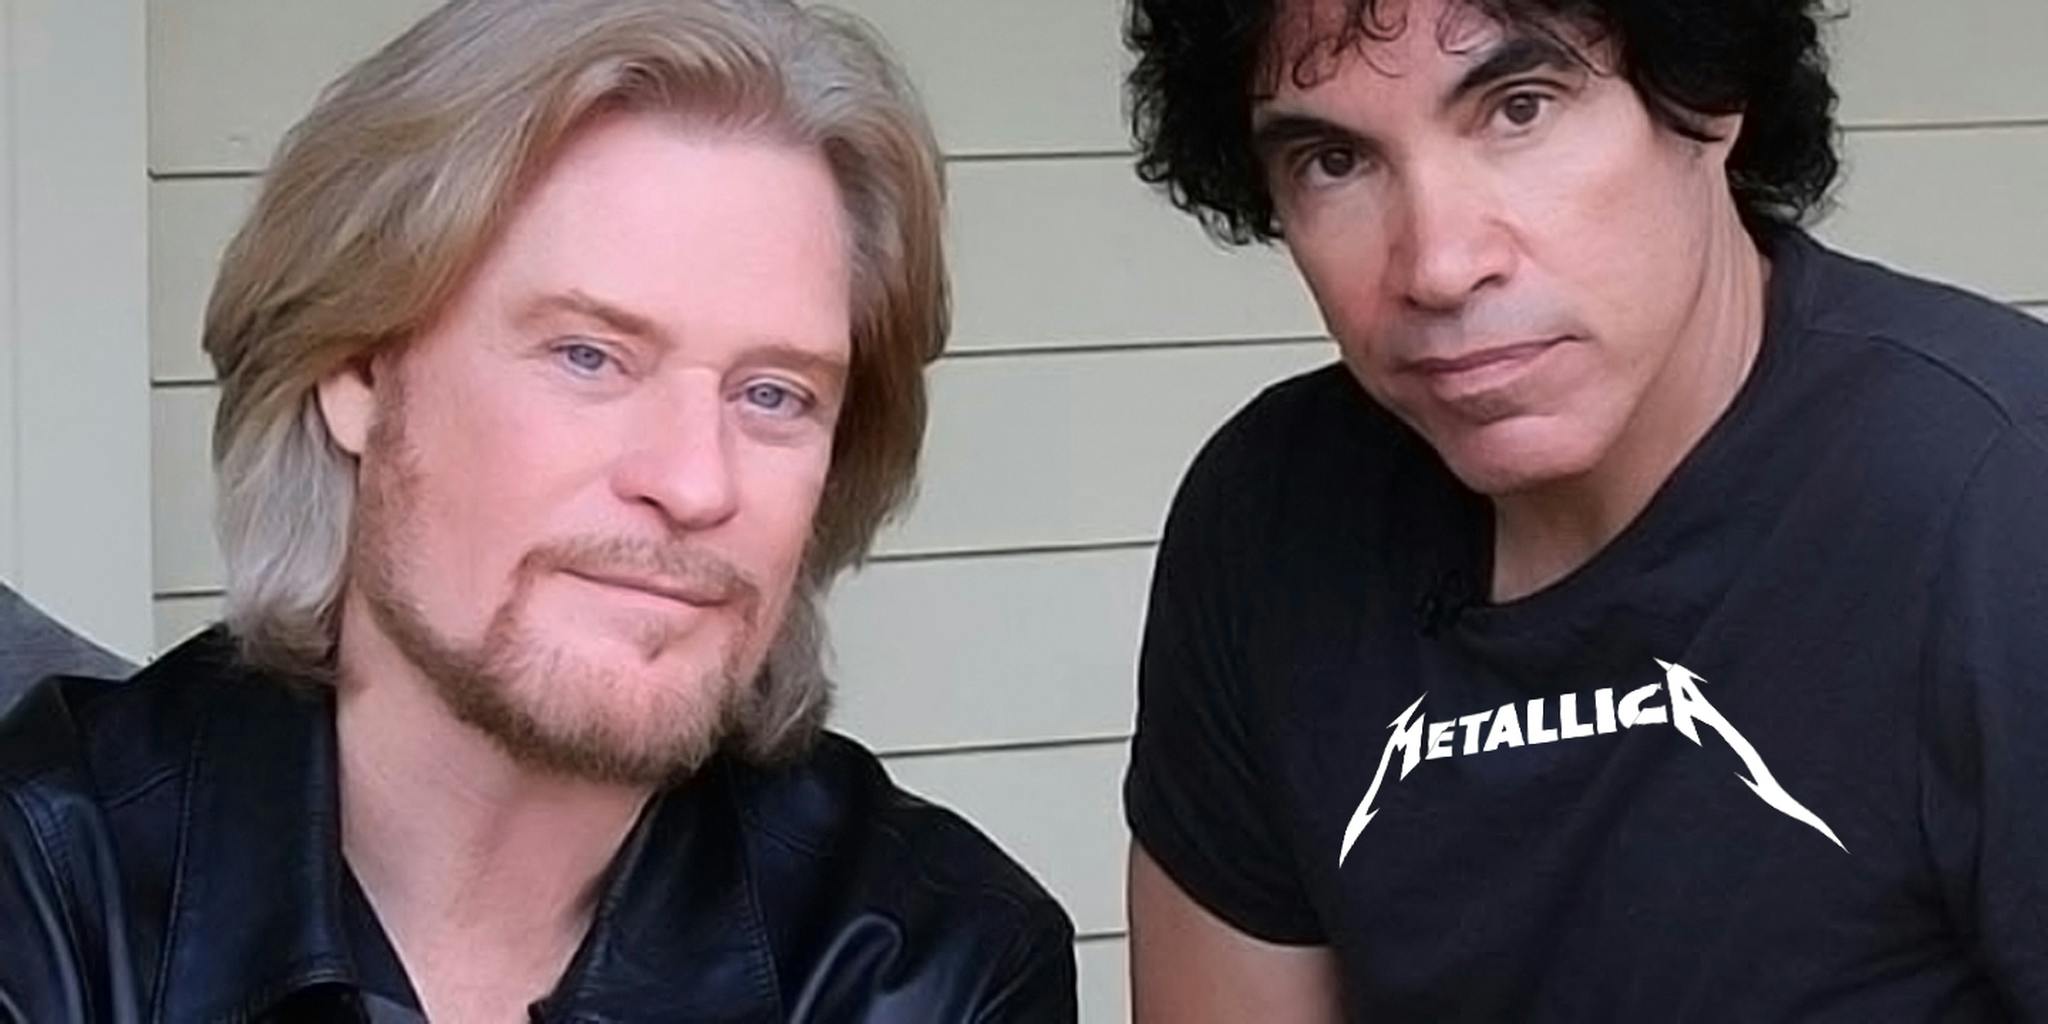 Daryl hall out of touch. Daryl Hall & John oates. Группа Hall & oates. Hall & oates. John oates.